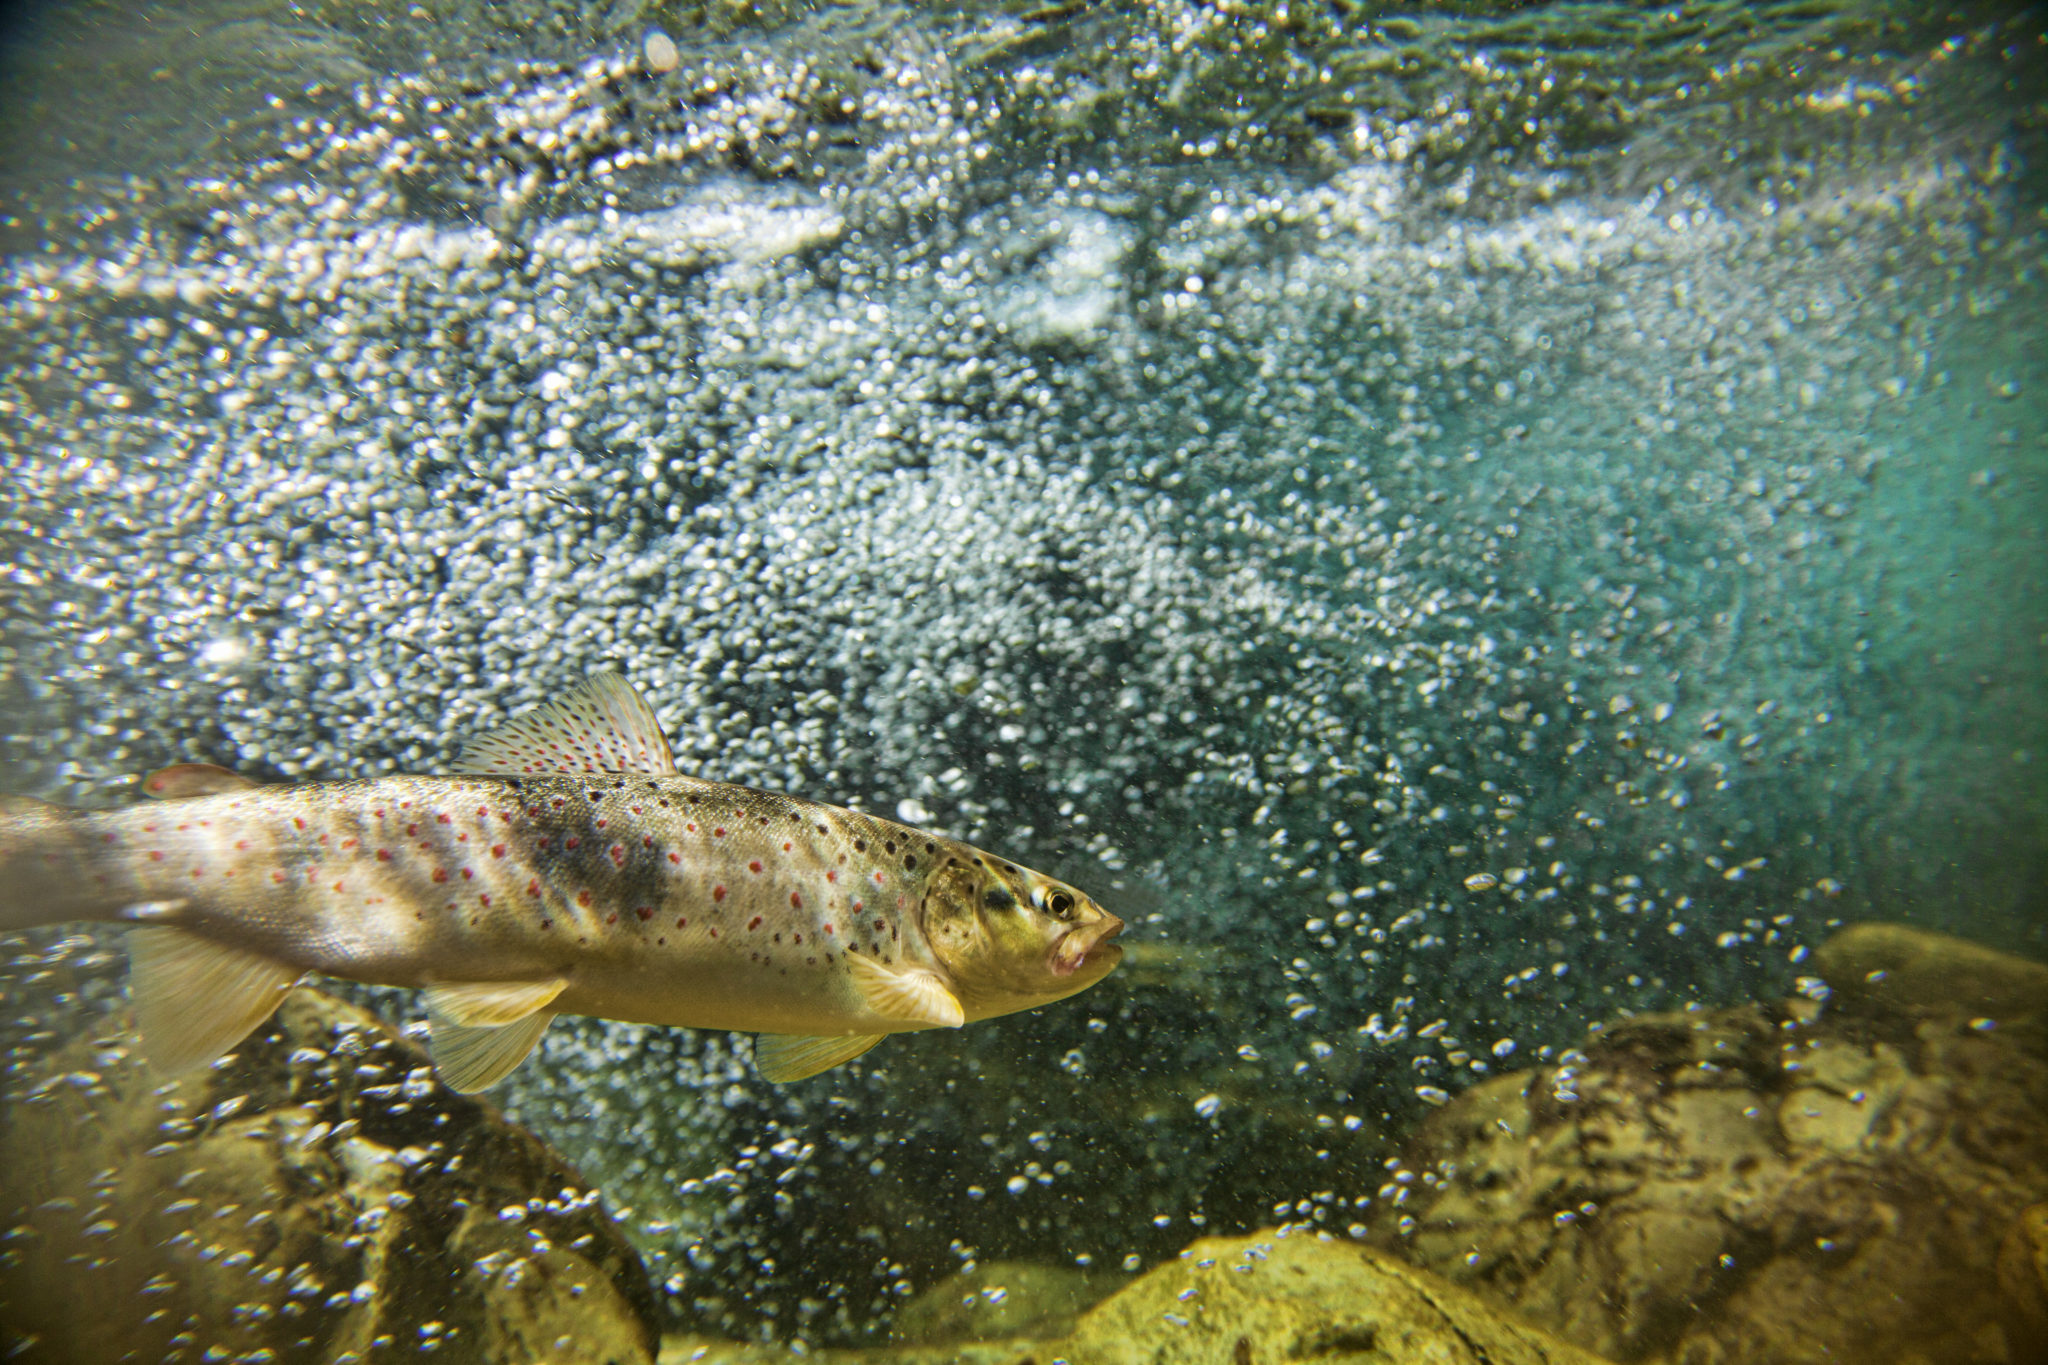 Single trout swimming in blue, green water in stream or lake with water bubbles